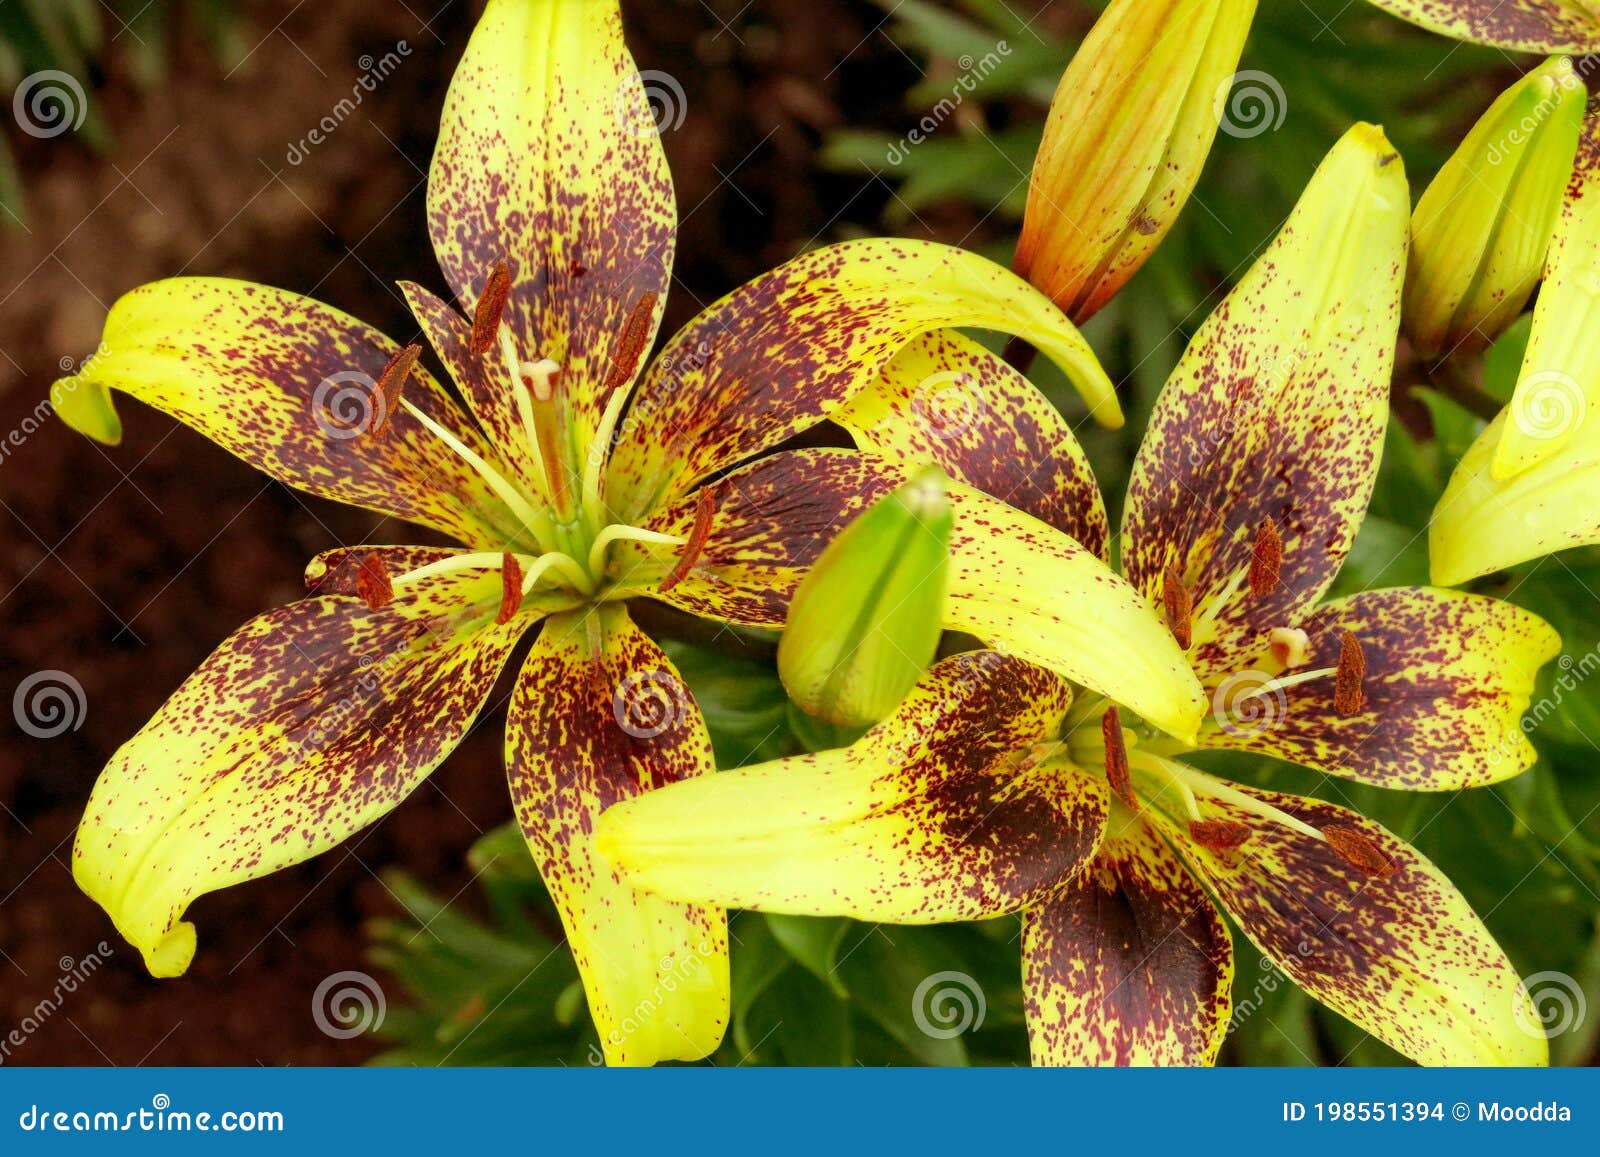 Yellow Lilies Flowers in a Garden Bed. Asiatic Lilies with Dark ...